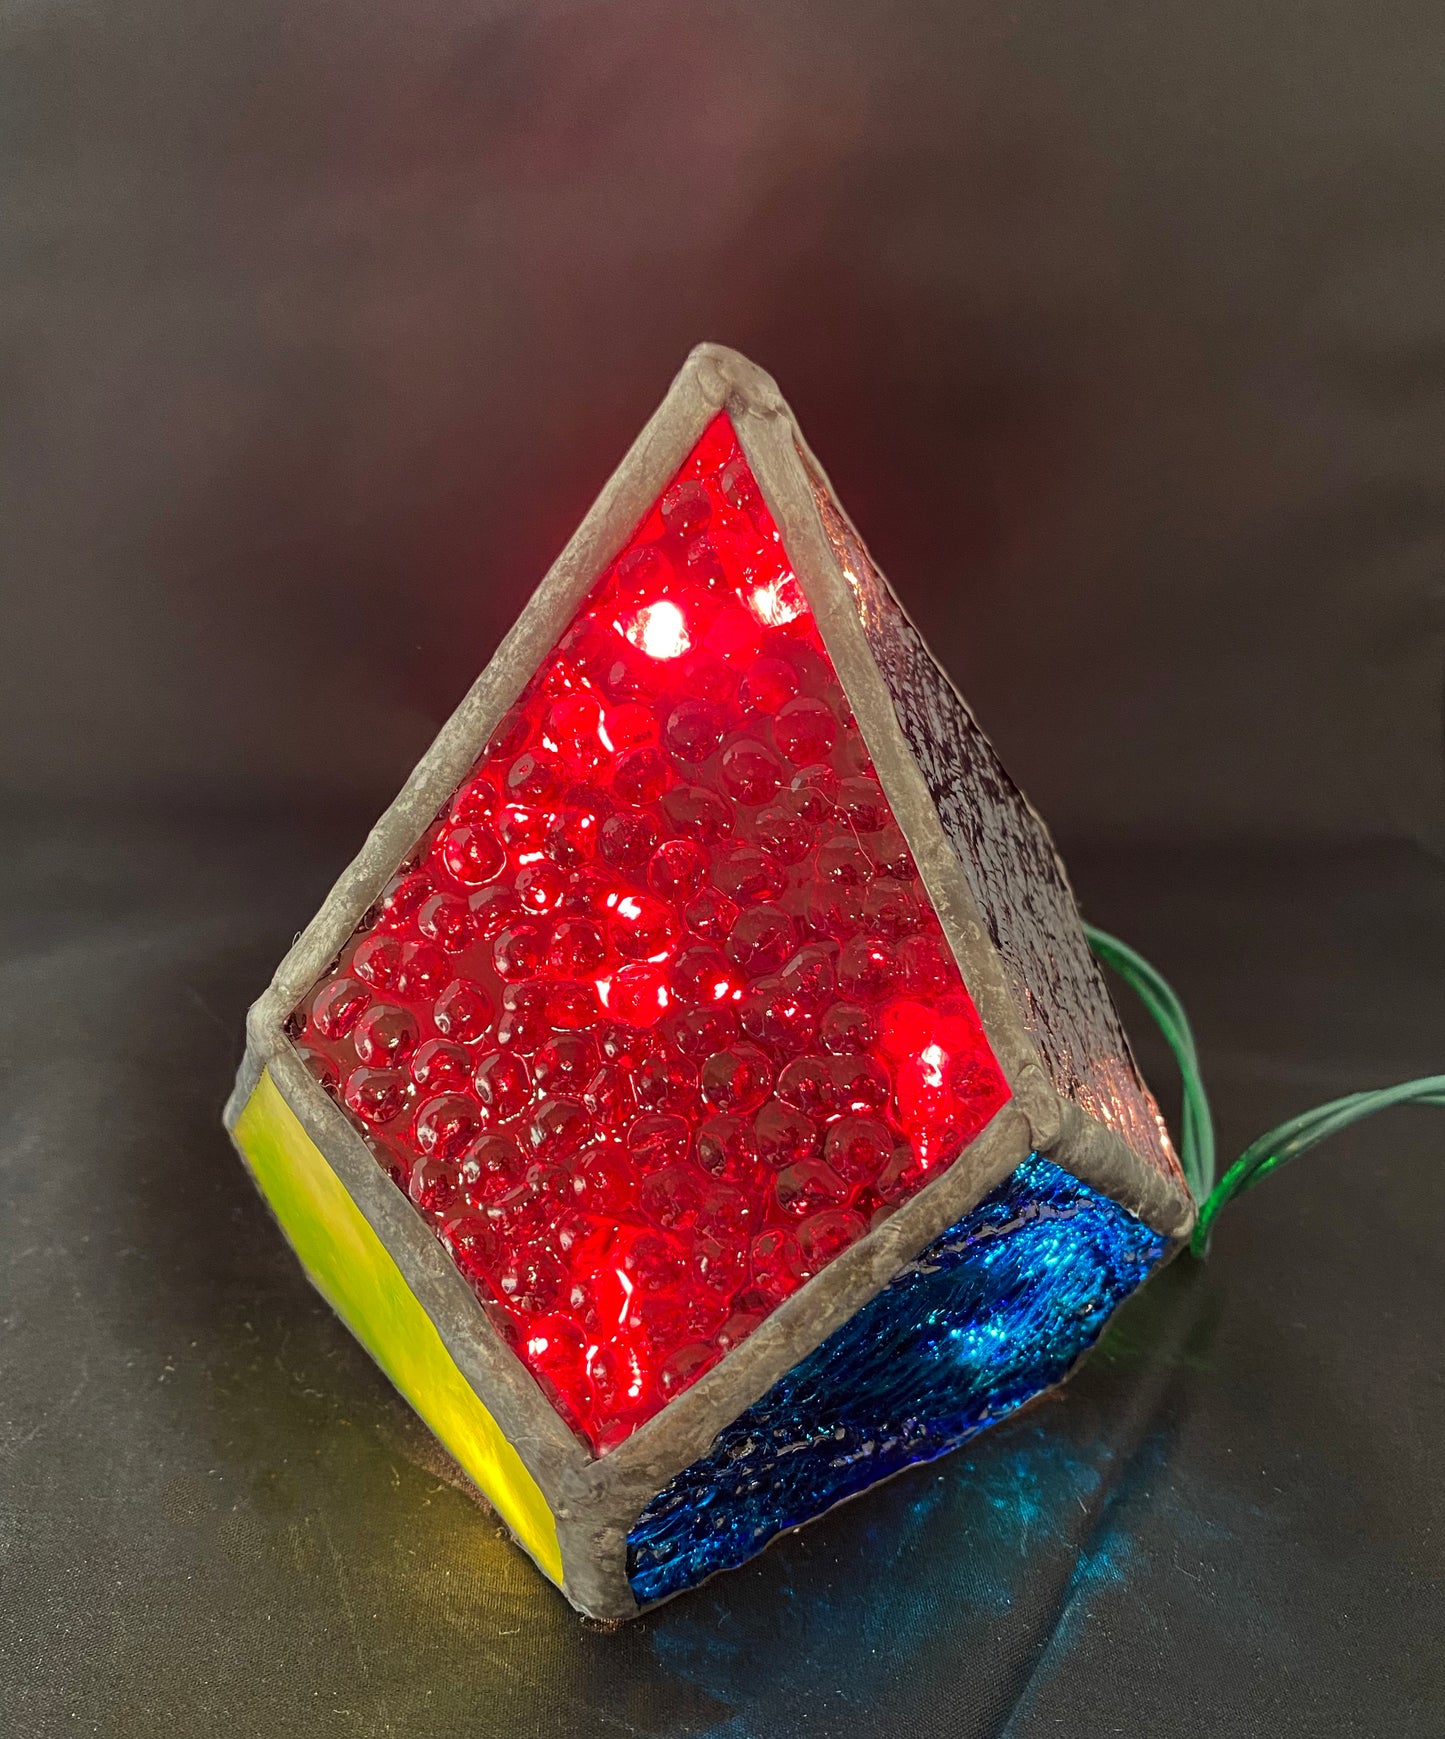 Lighted Gem: Stained Glass Small Geometric Prism Lamp